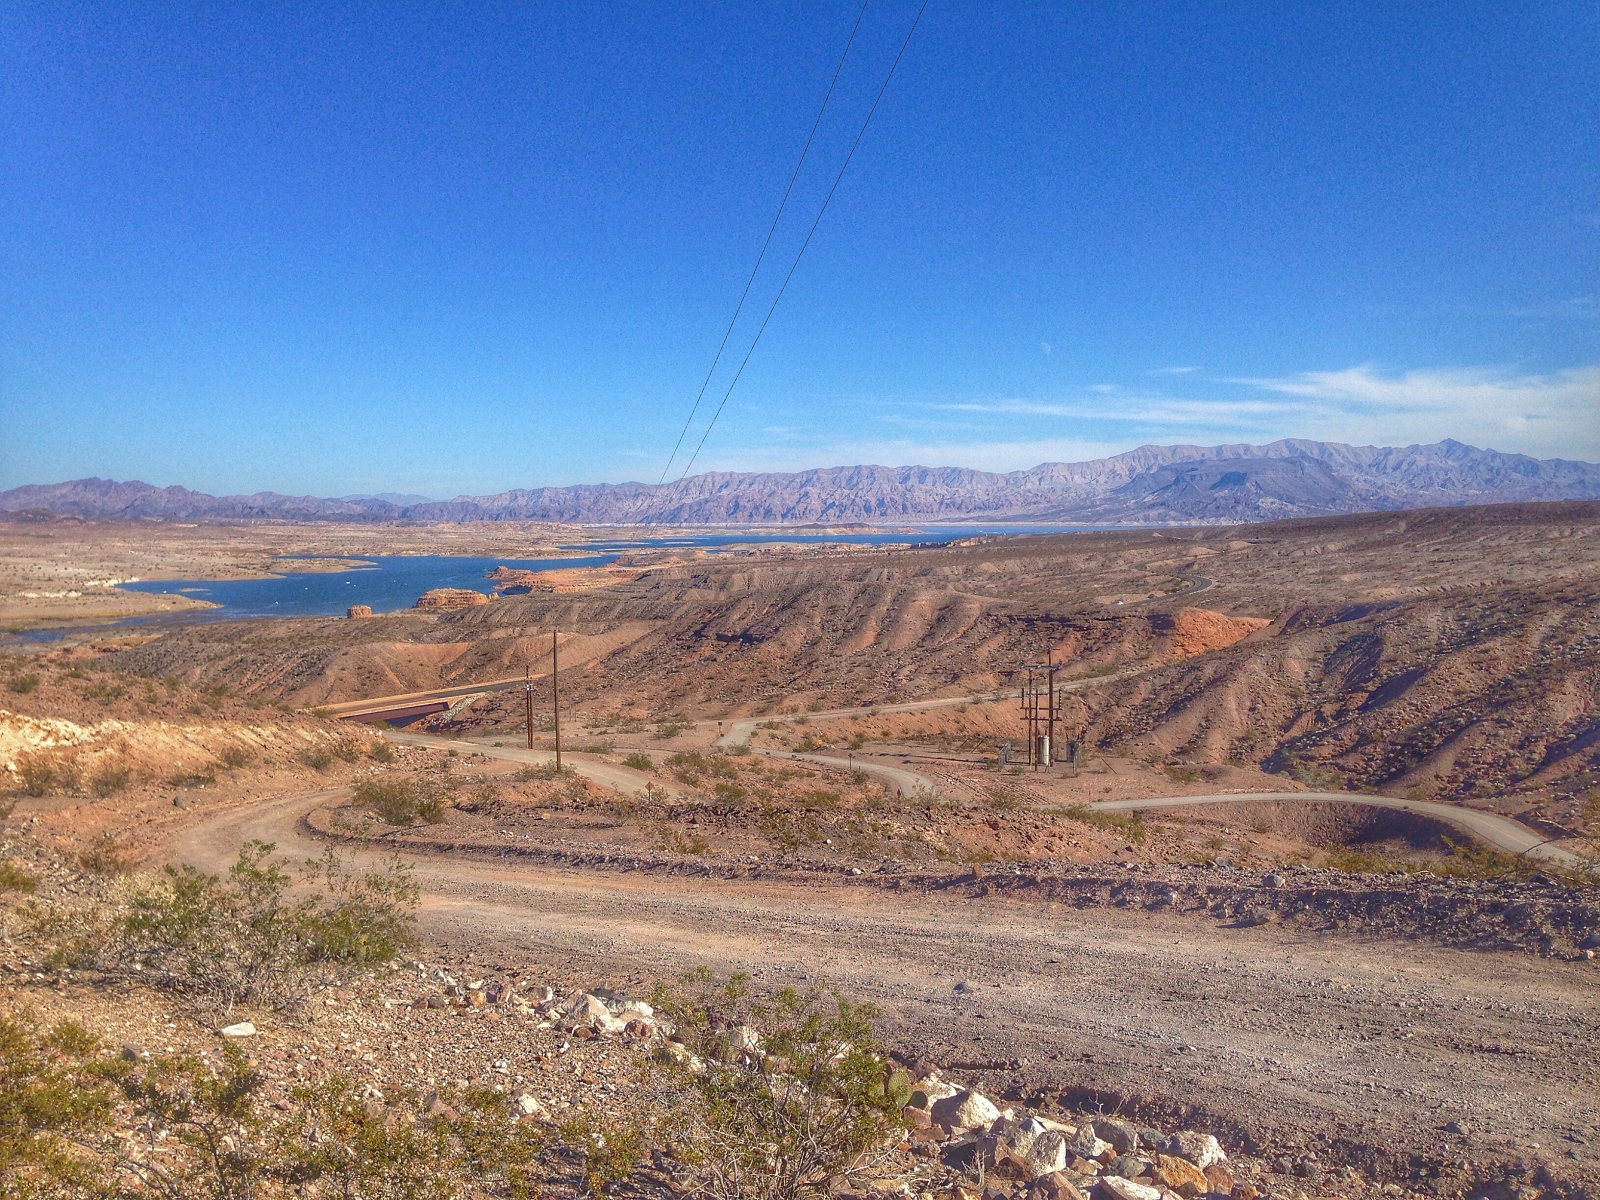 Perhaps the most isolated portion, this drops into Lake Mead recreation area.